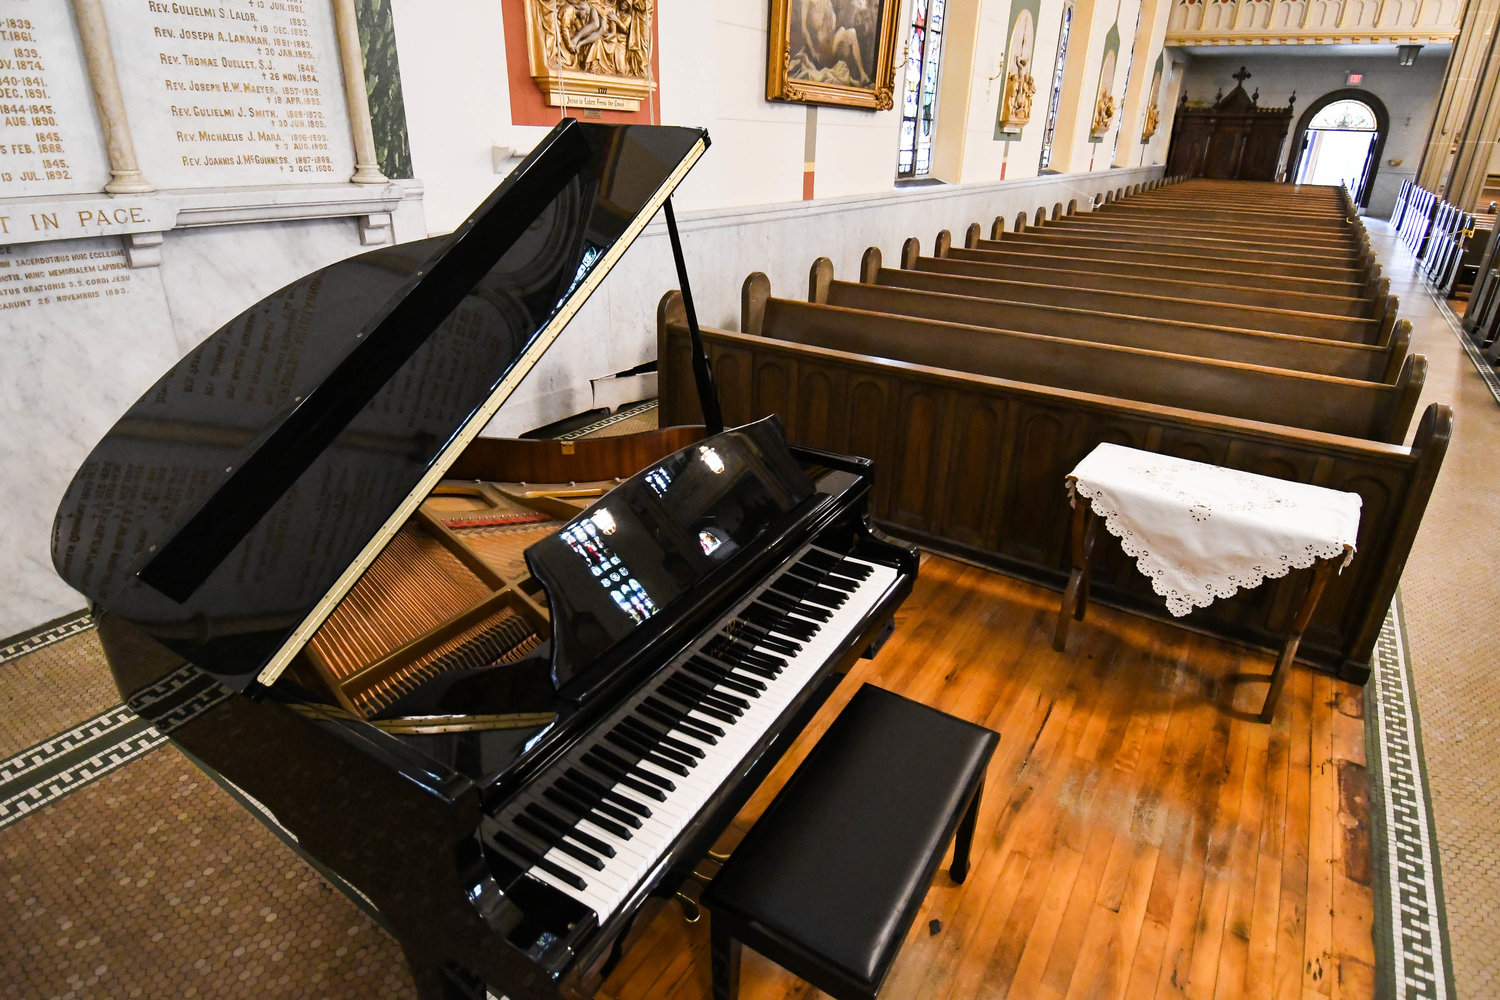 This donated Story and Clark piano at Historic Old St. John’s Church in Utica provides bright sounds to the large space.